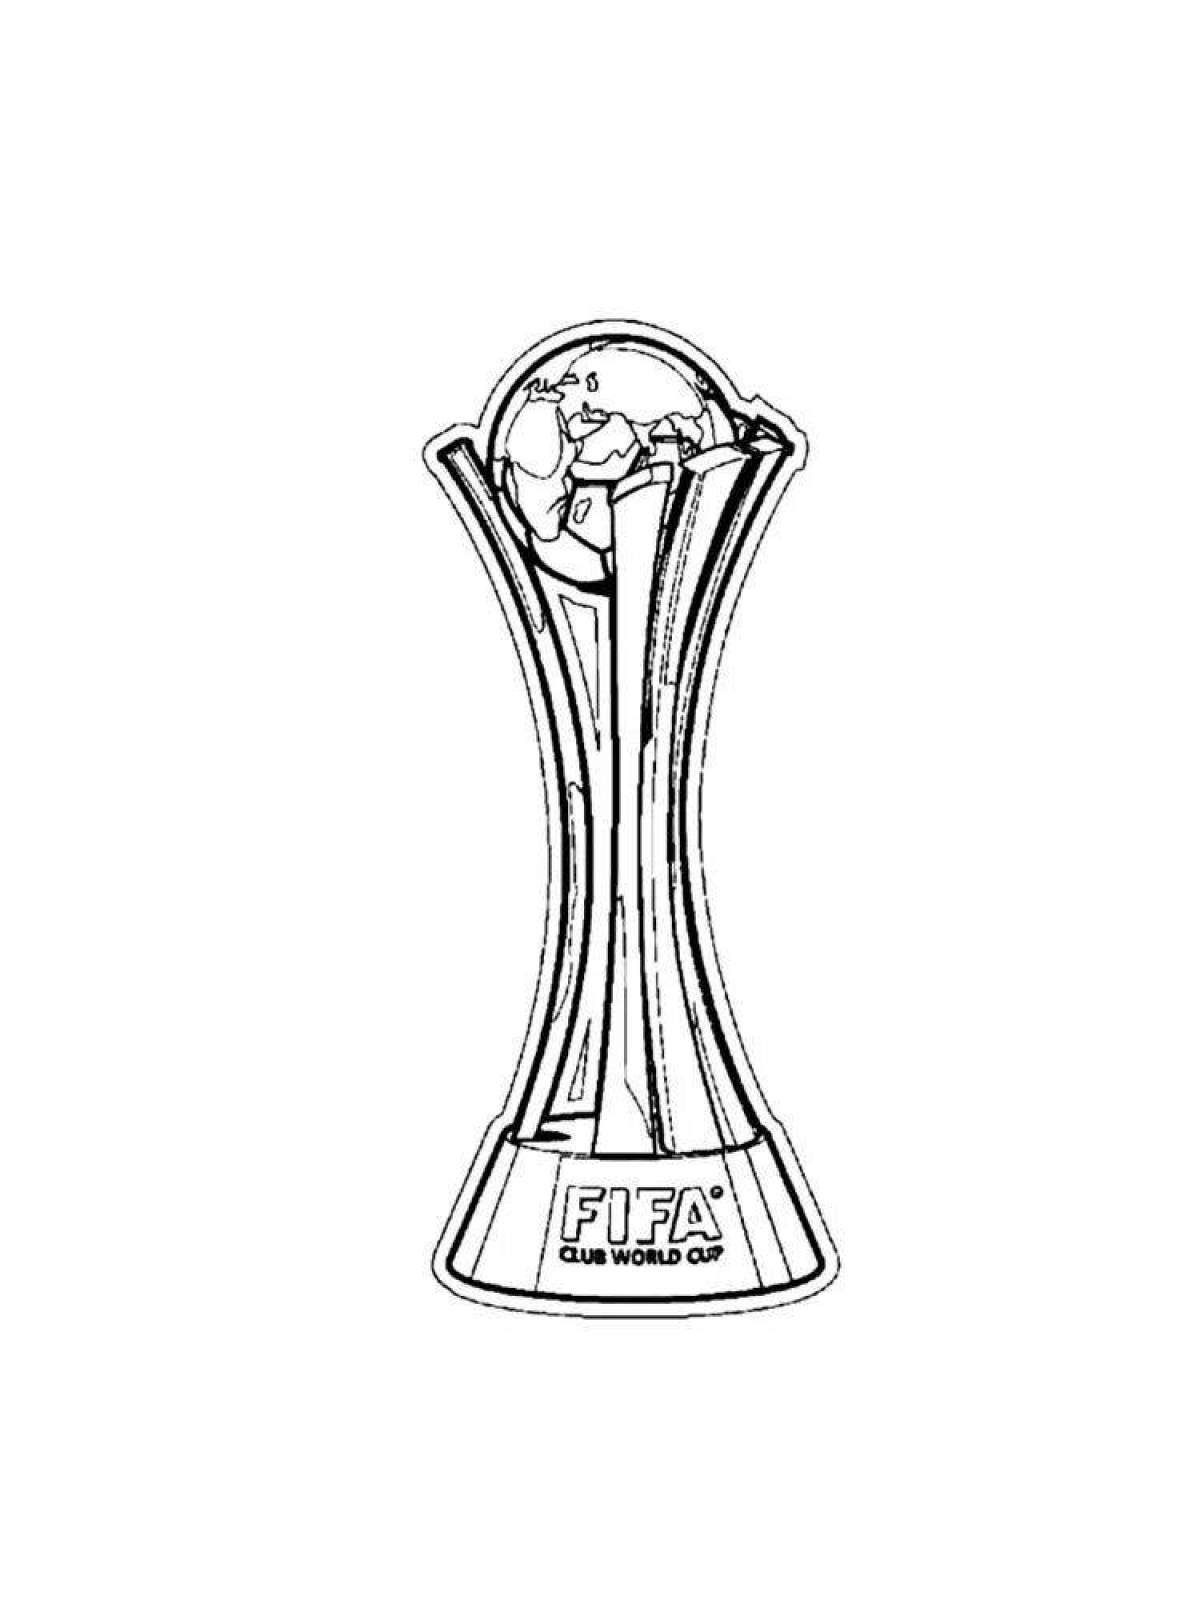 Glitter World Cup coloring book